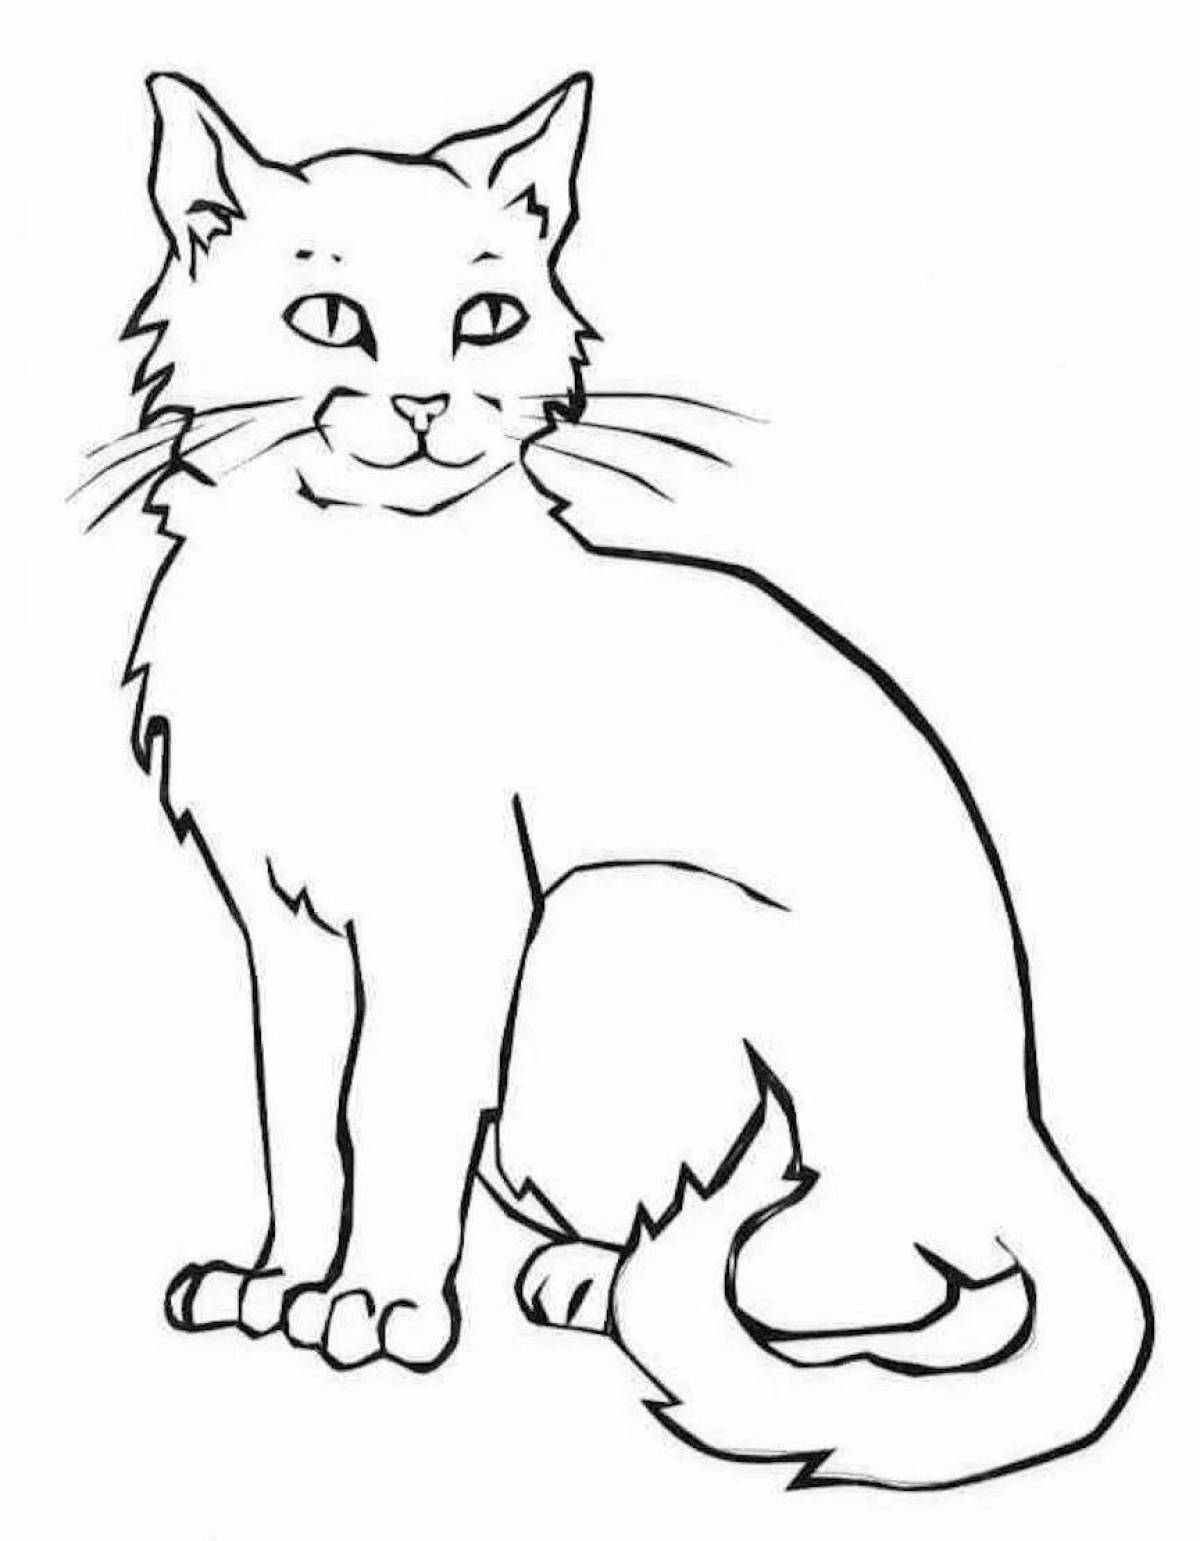 Relaxed black and white cat coloring book